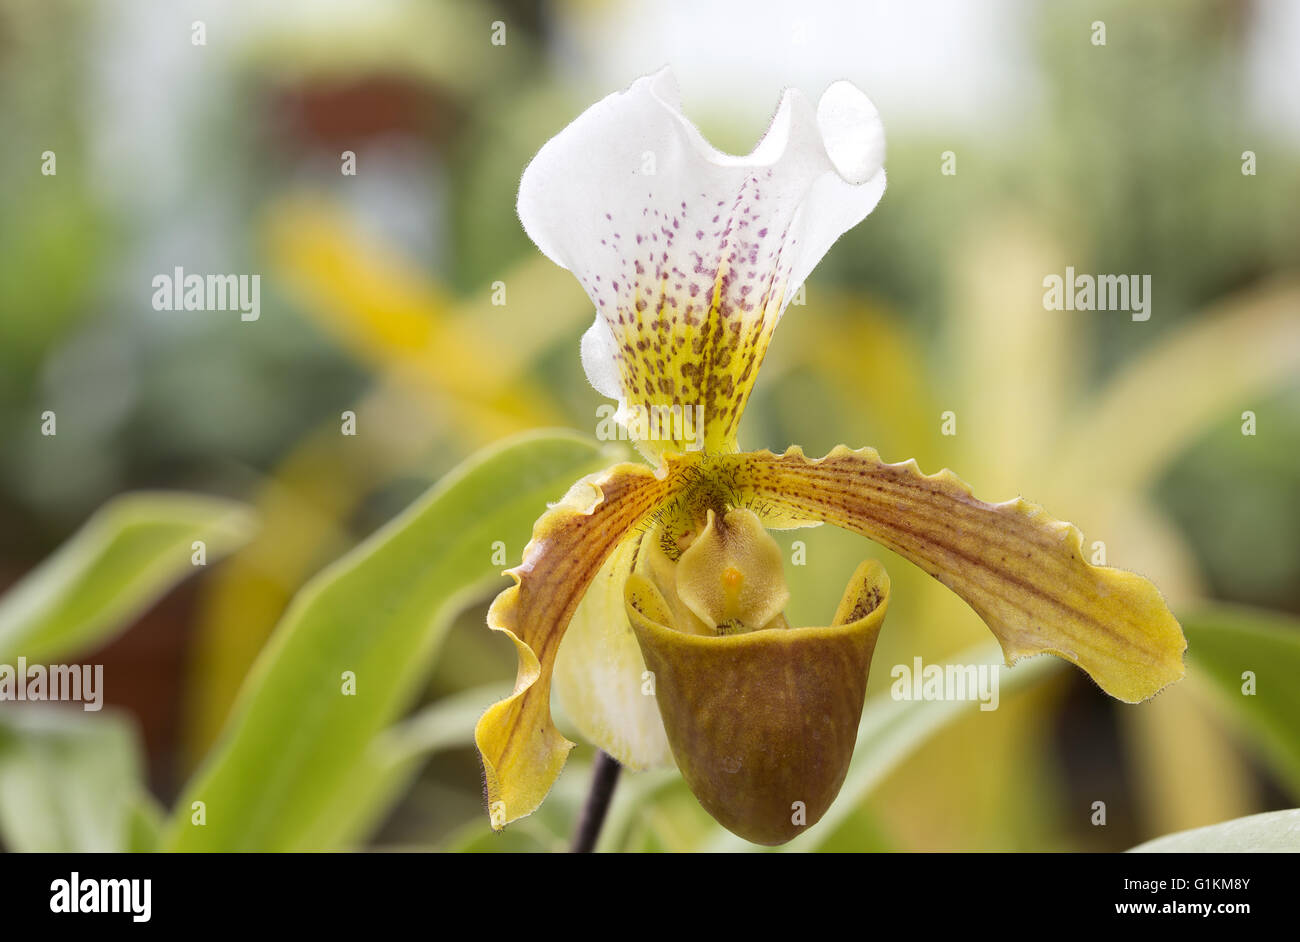 Paphiopedilum exul detail of the flower on blurred background Stock Photo